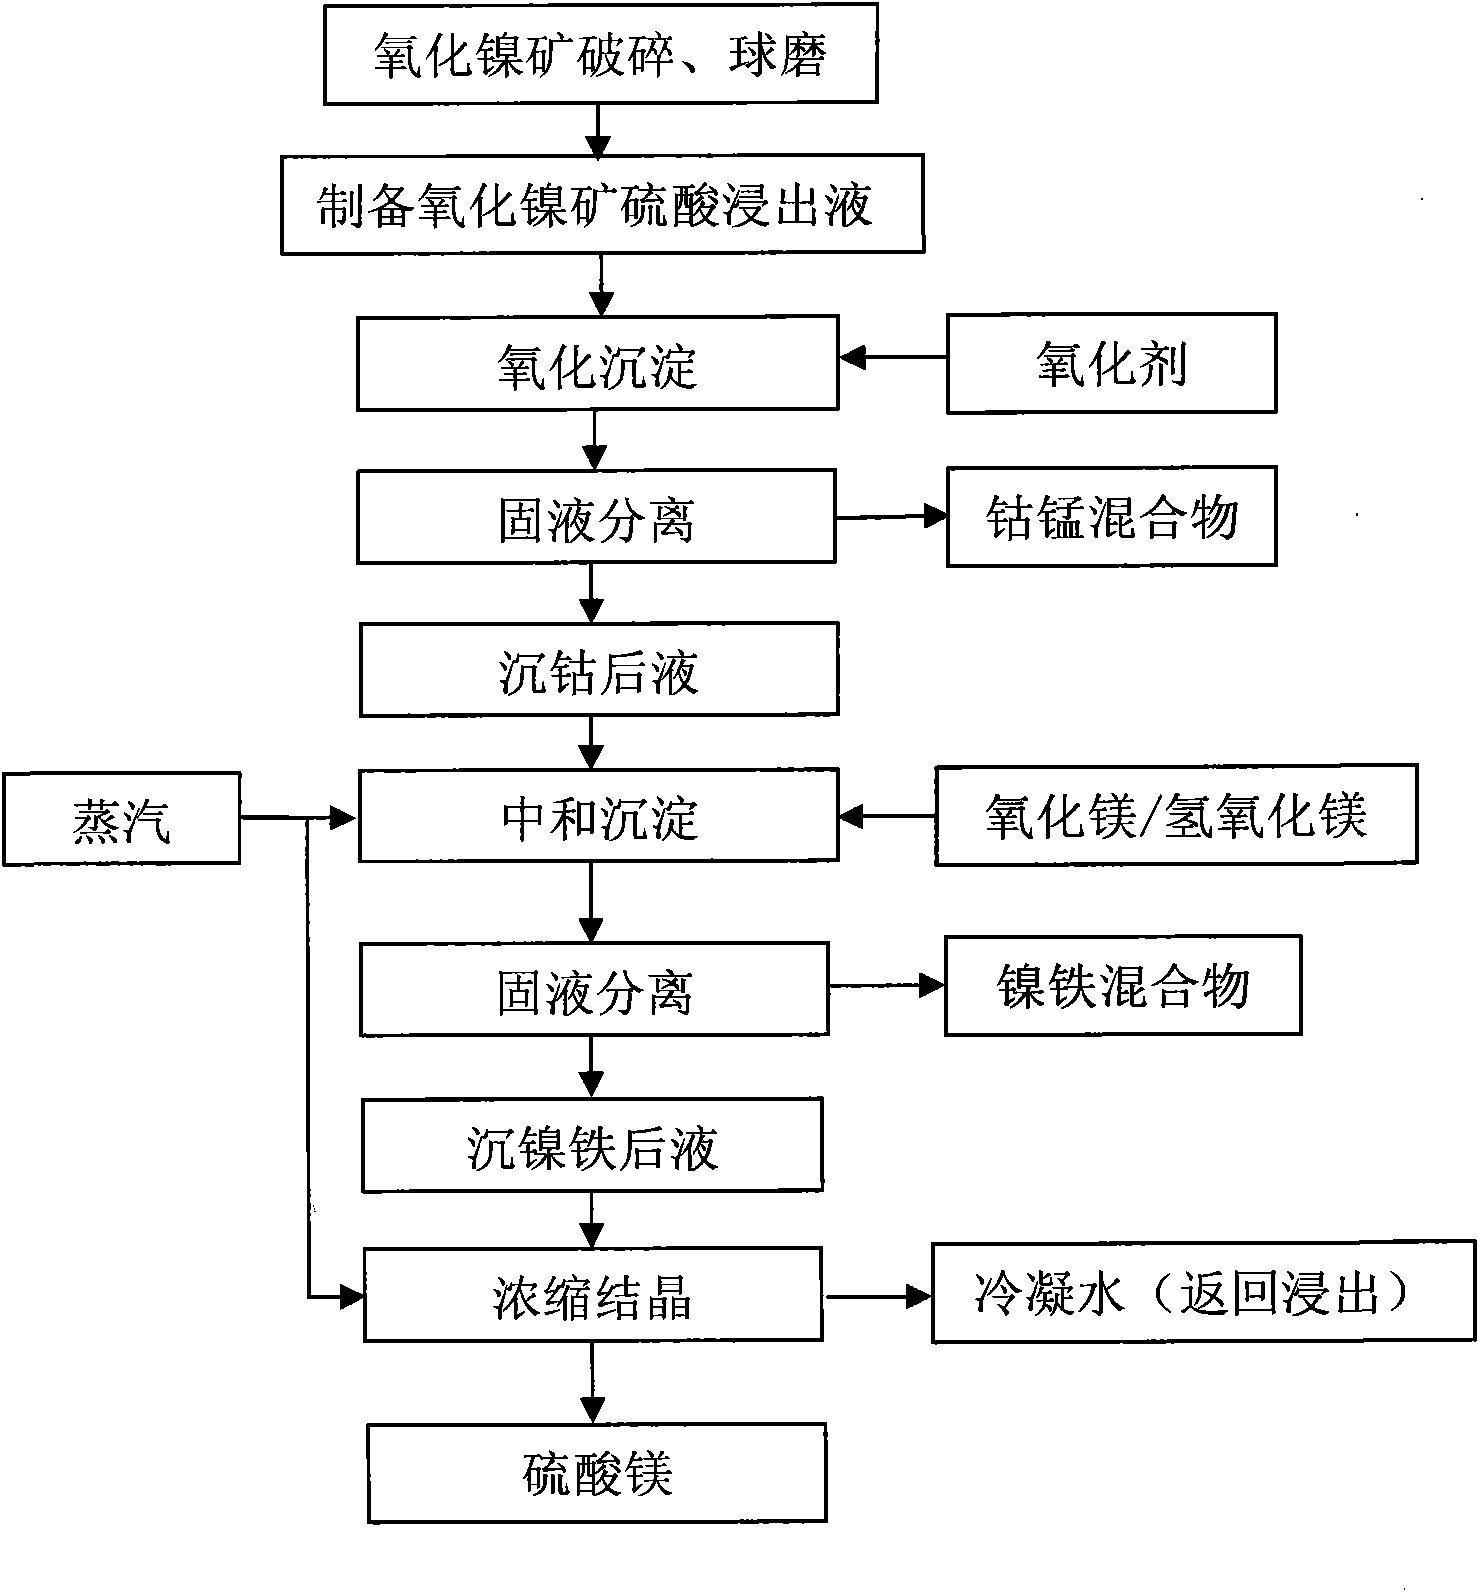 Method for recovering nickel, cobalt, iron, manganese and magnesium from oxidized nickel ore